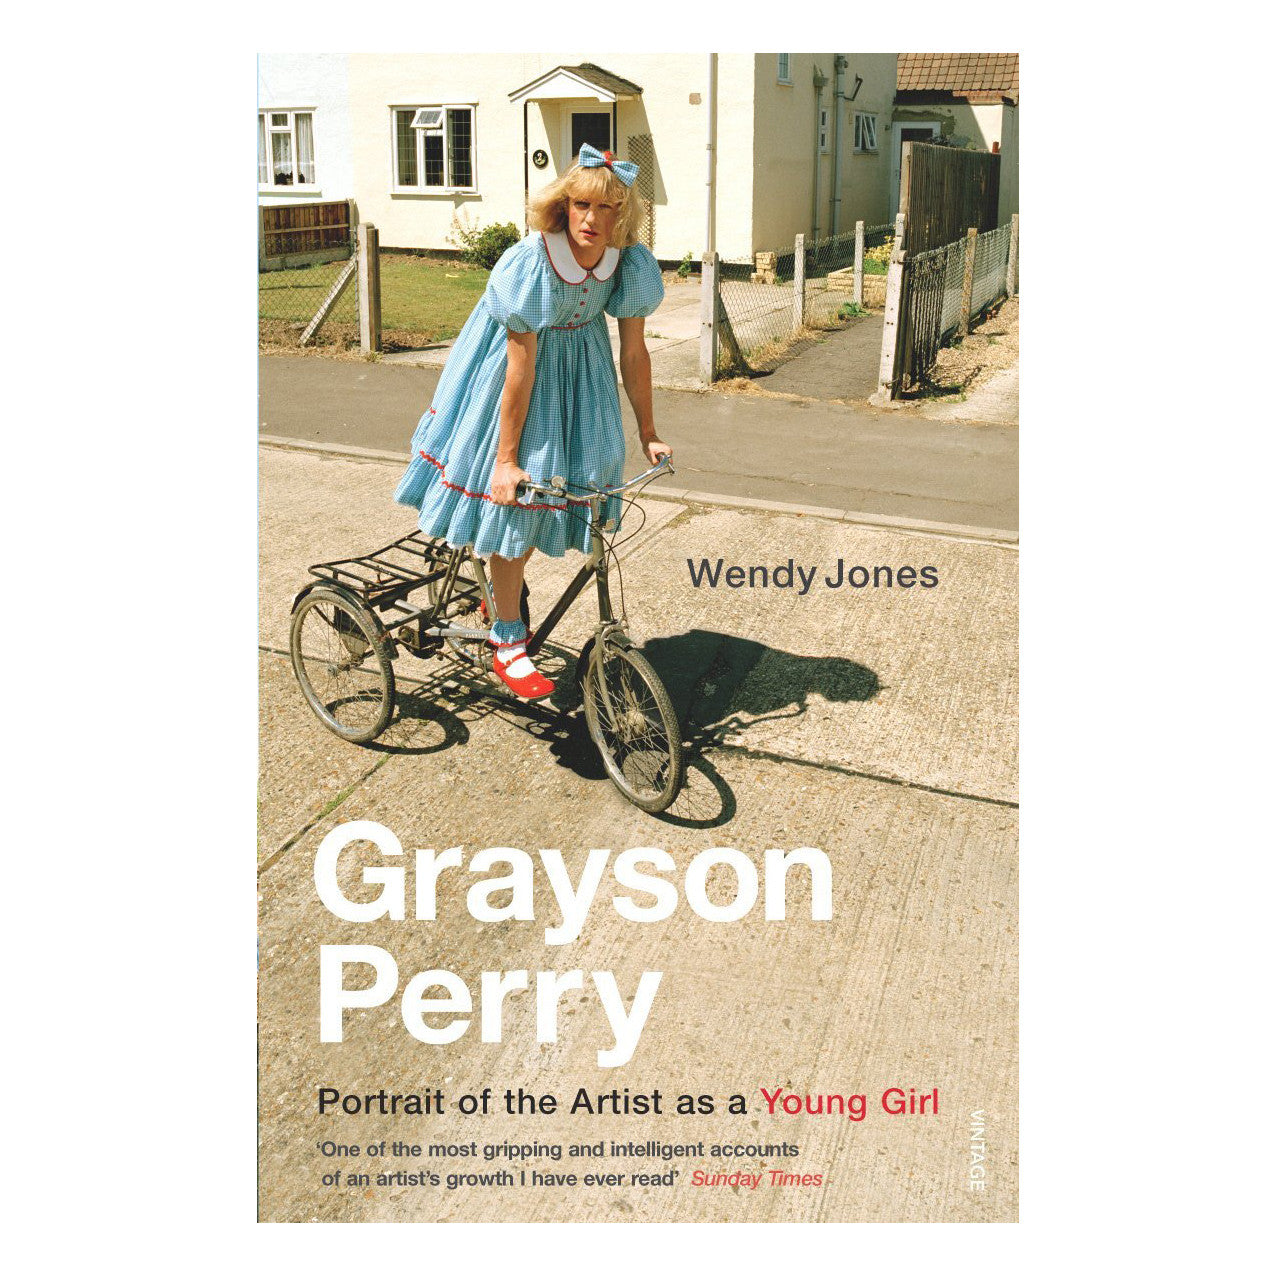 Grayson Perry Portrait of the Artist as a Young Girl